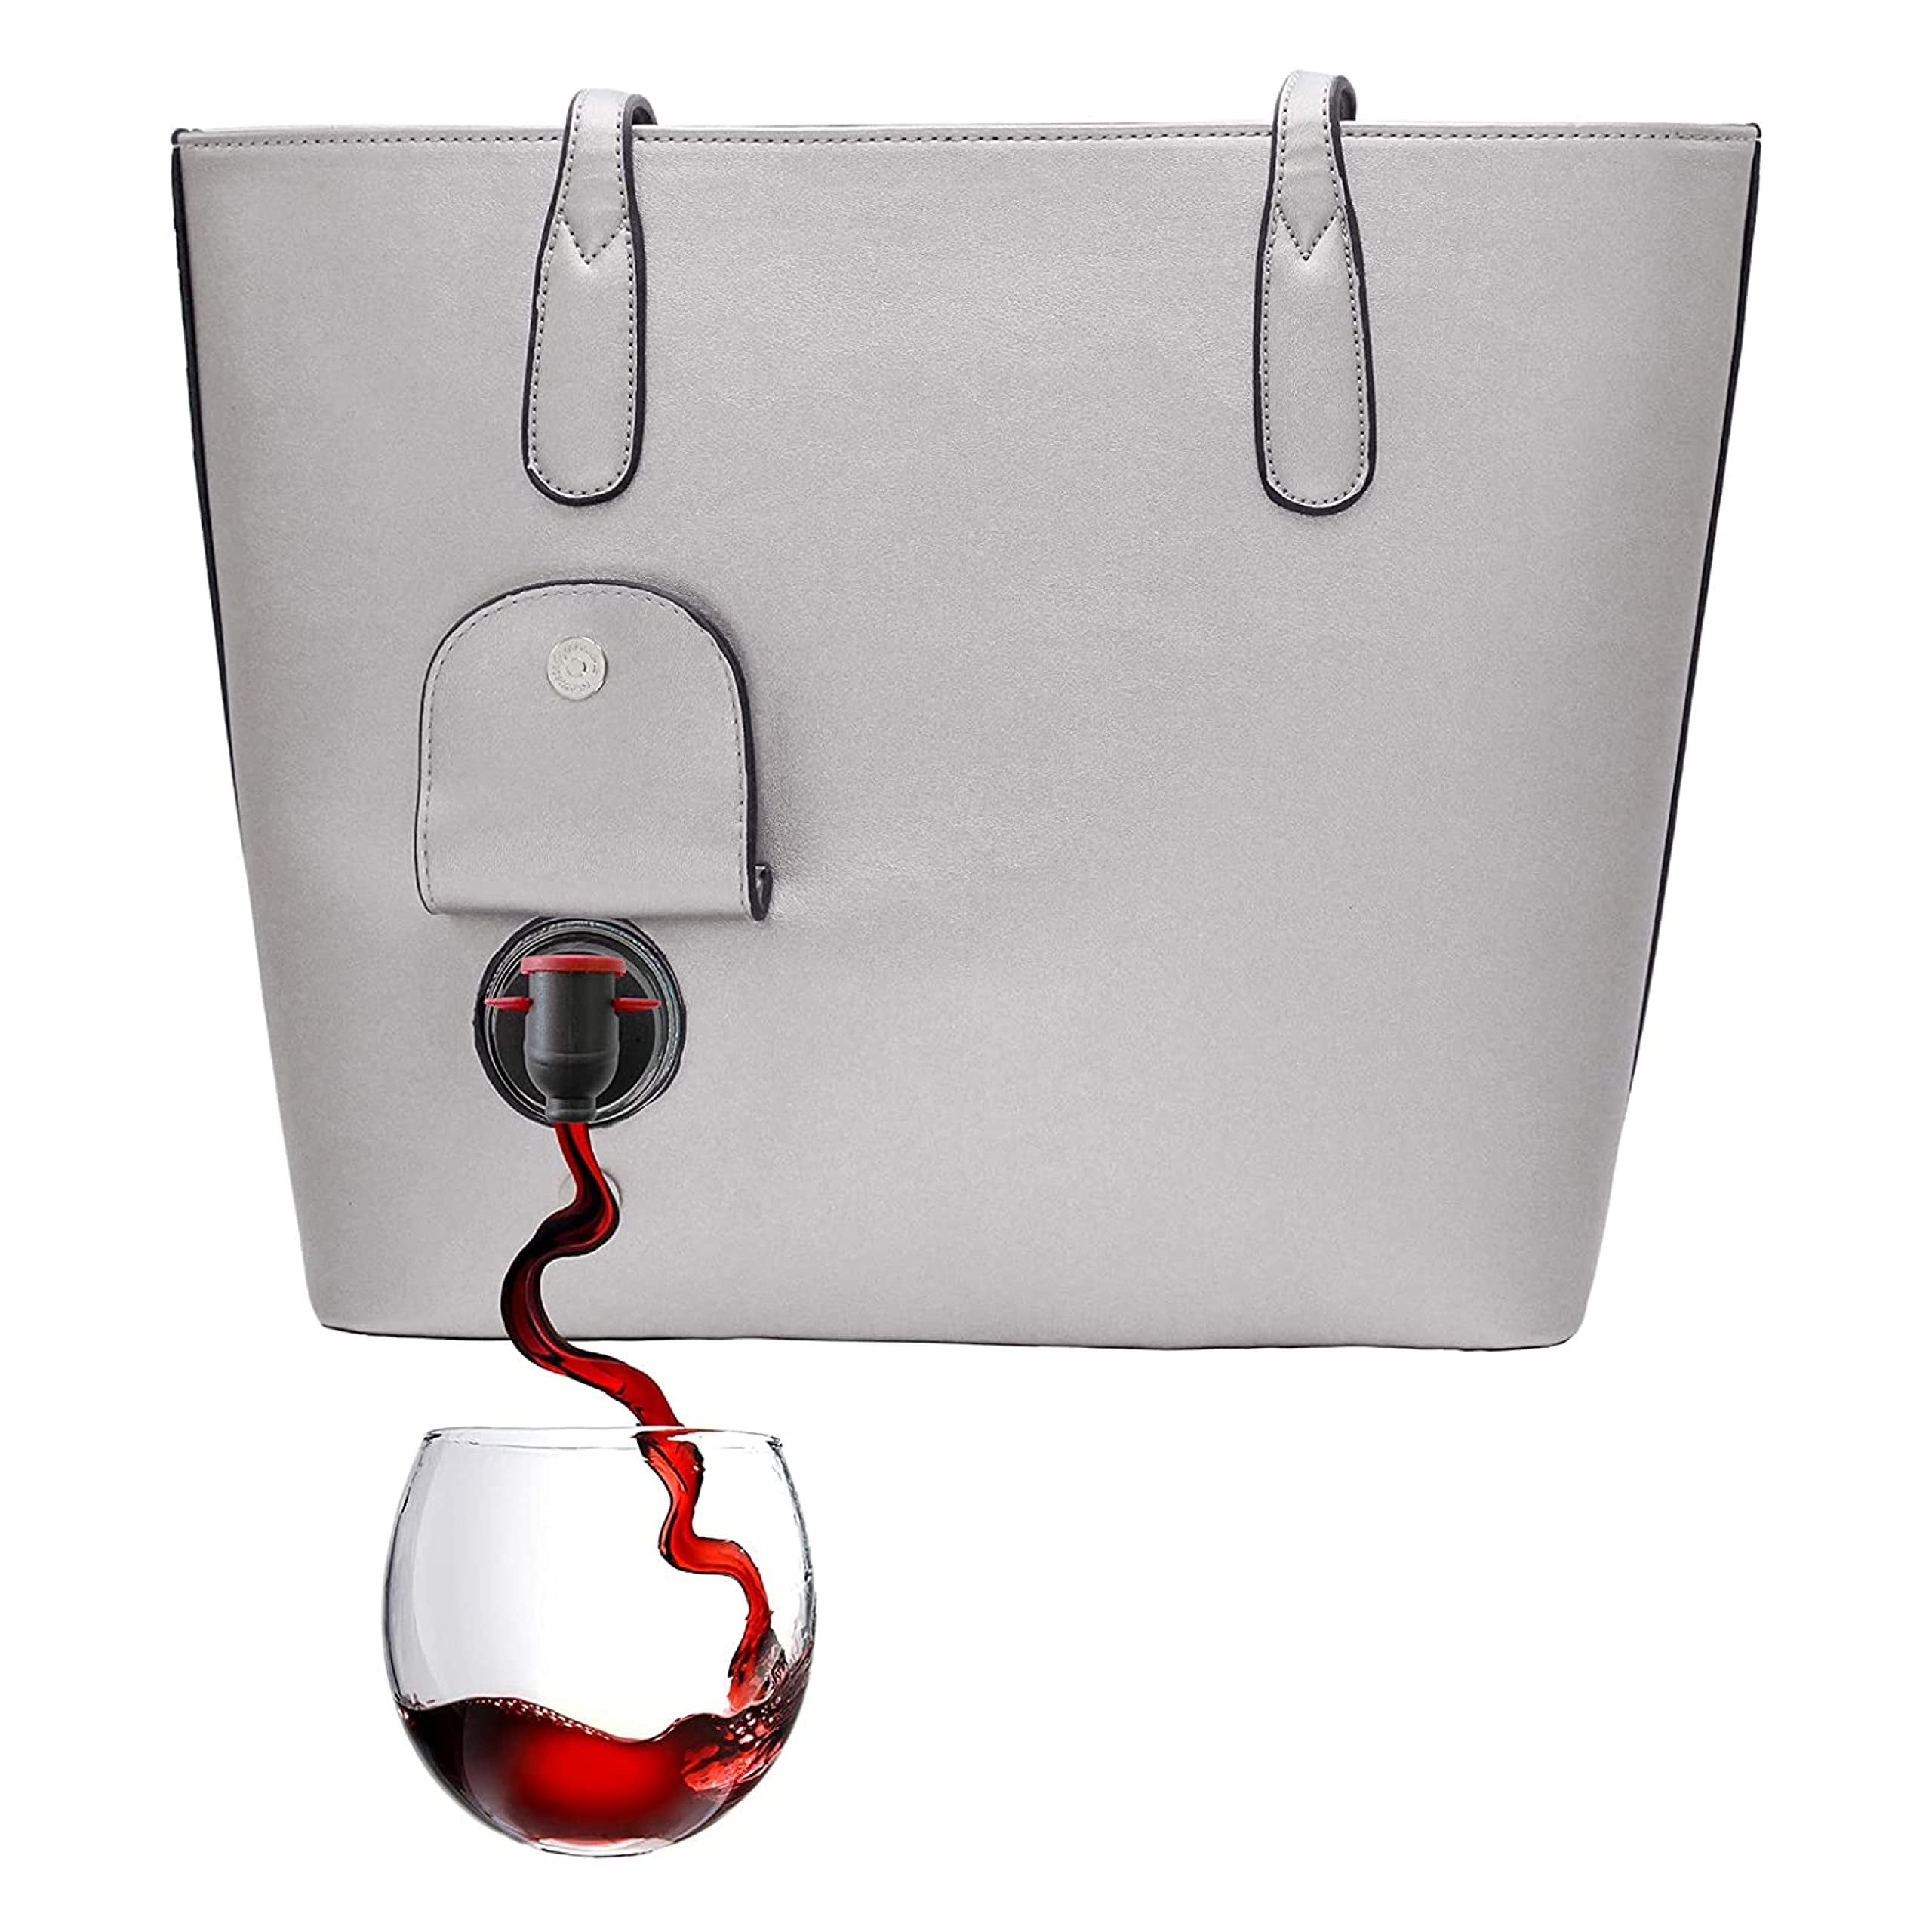 This purse has a hidden wine compartment